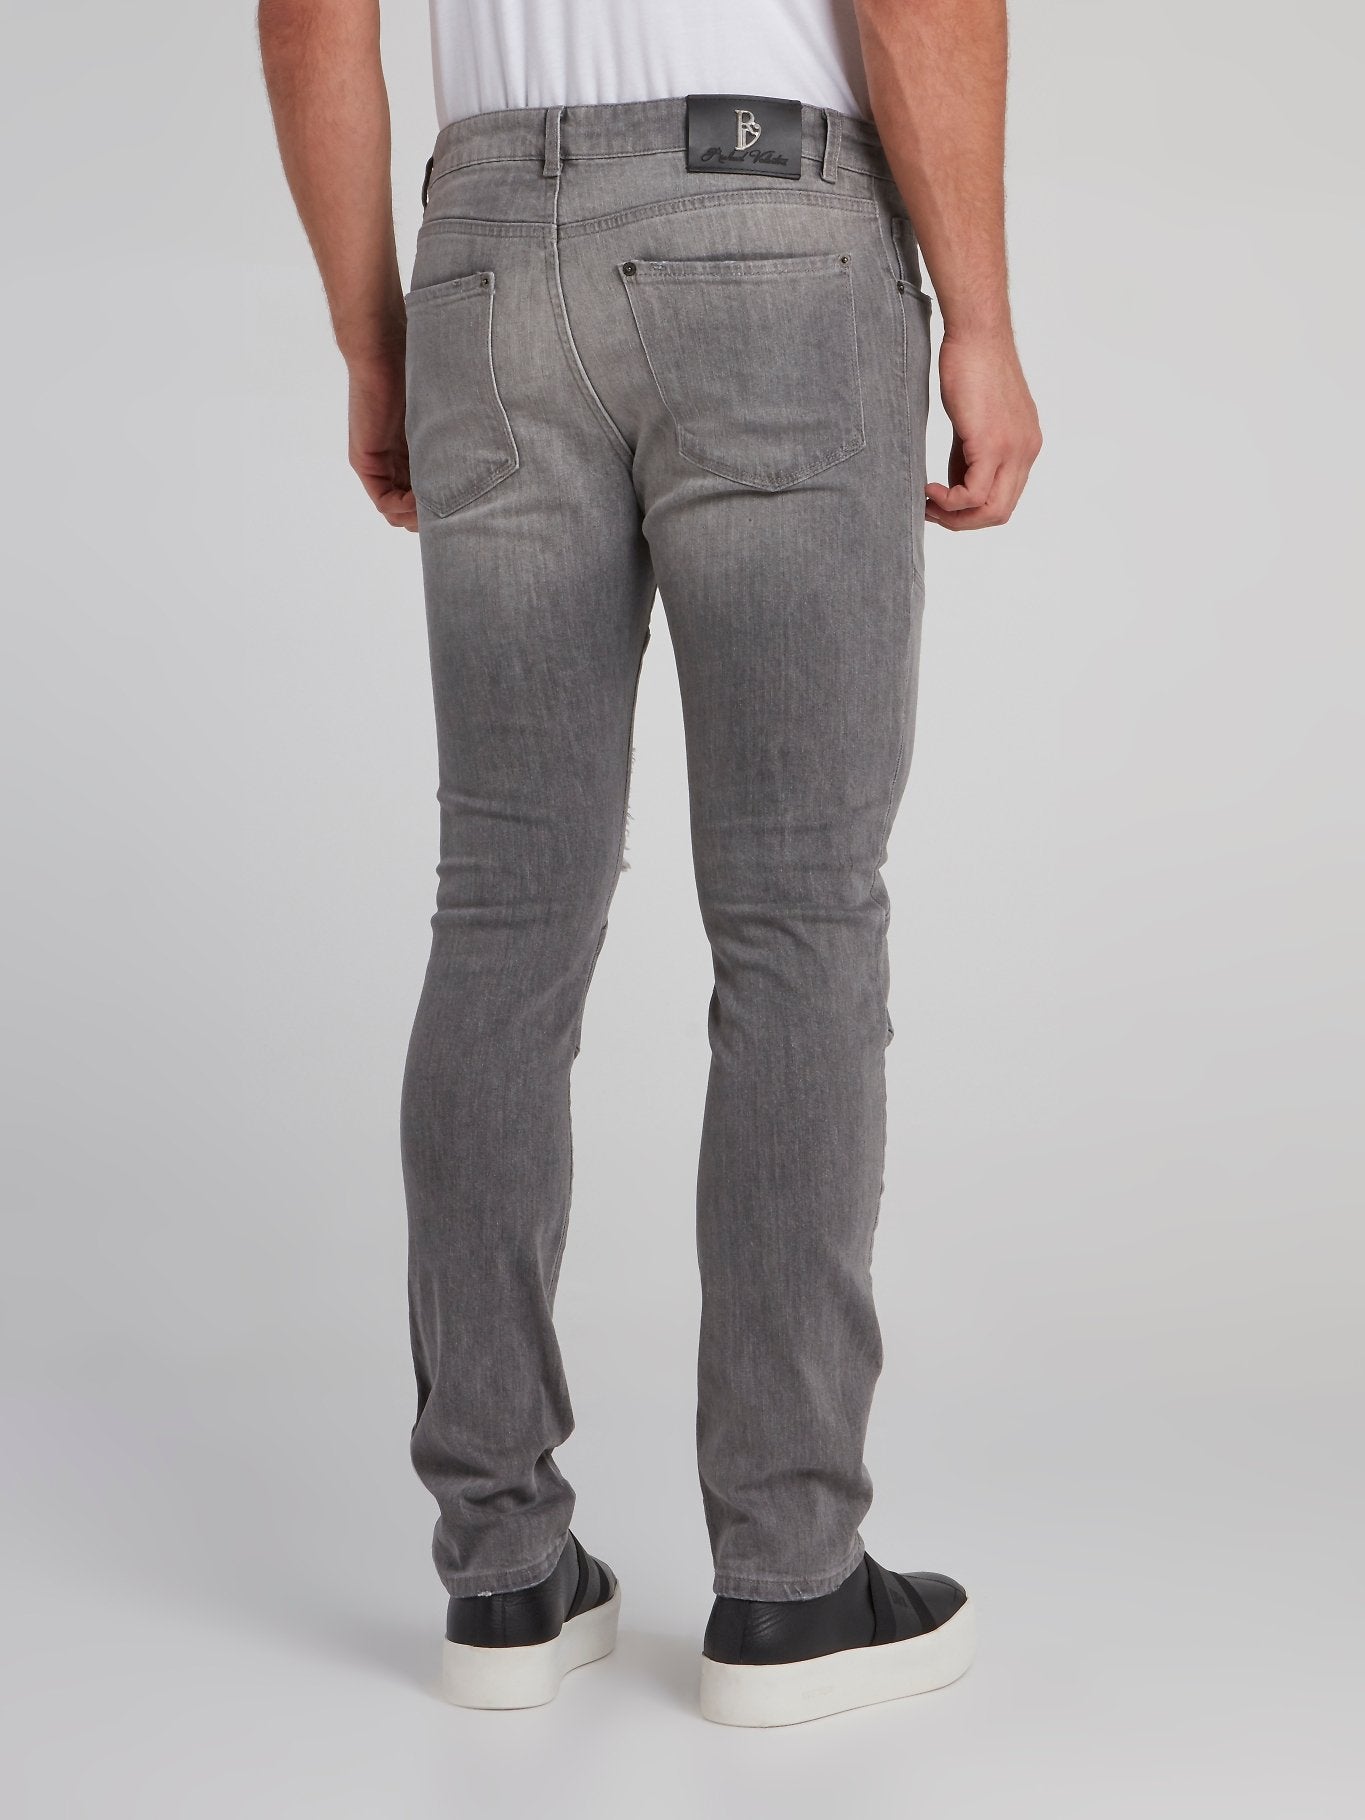 Feodor Grey Patched Slim Fit Jeans